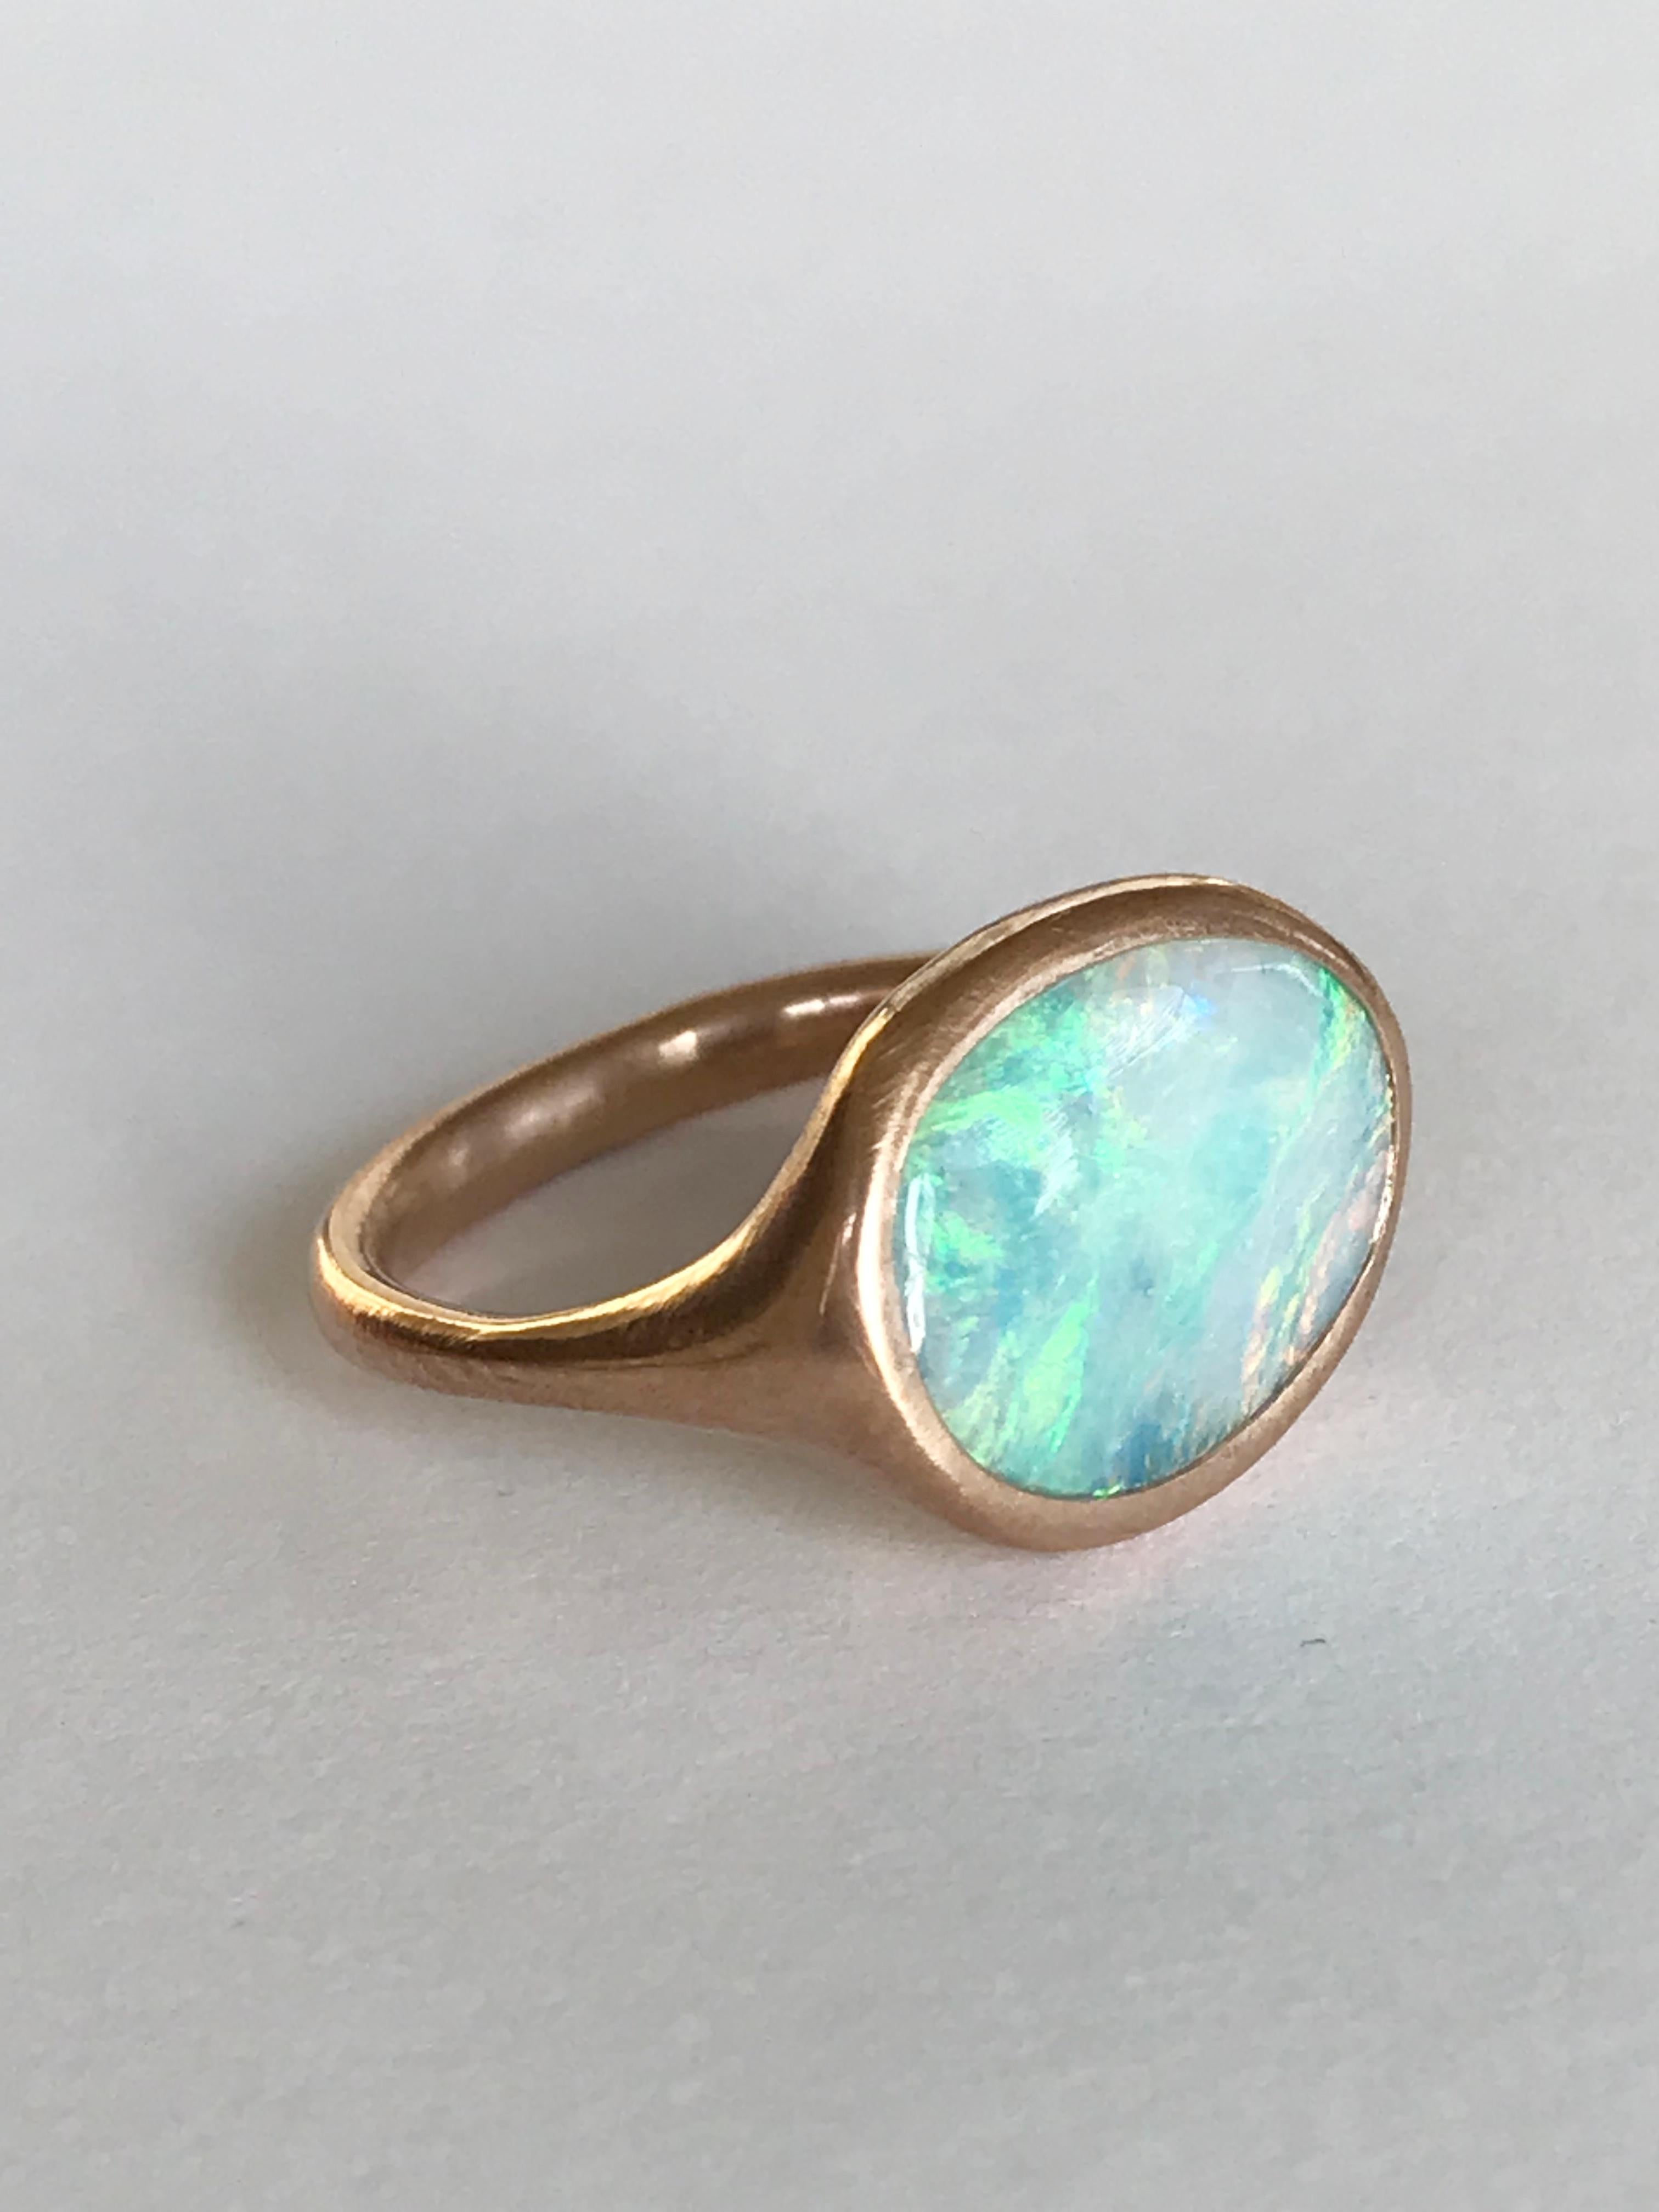 Dalben design One of a kind 18 kt rose gold matte finishing ring with a 3,98 carat bezel-set oval Australian Boulder Opal .  
The stone has light blue pastel colors with green light spots.
Ring size 6 3/4 - EU 54 re-sizable to most finger sizes. 